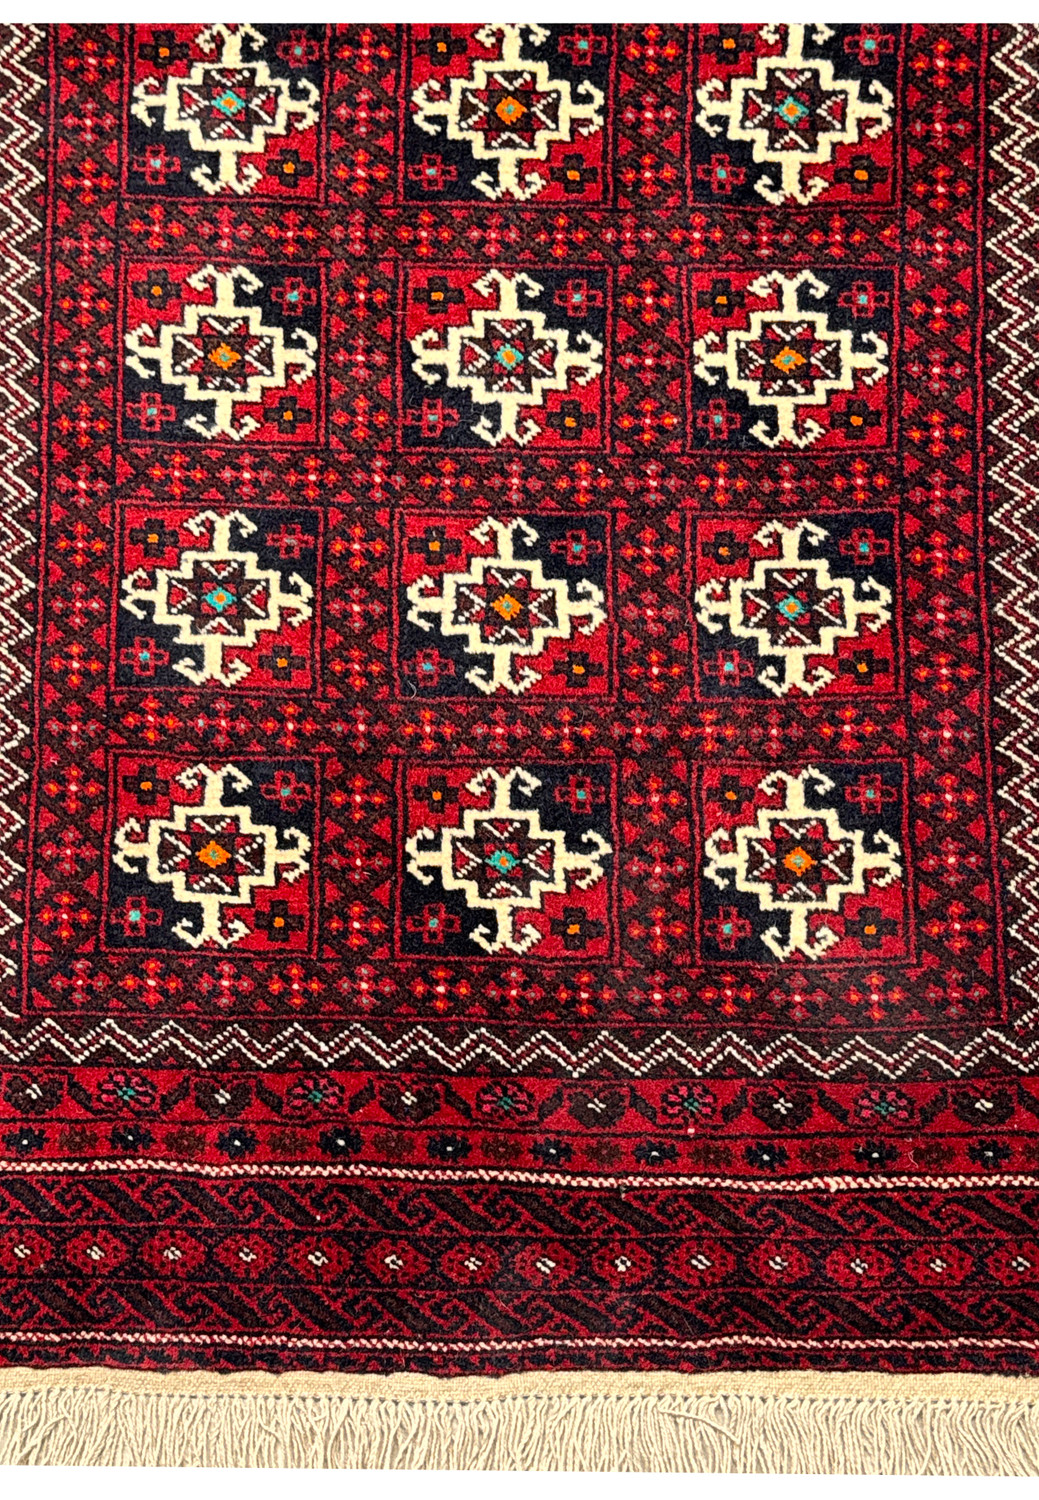 Full view of a Persian Baluch area rug, emphasizing the rich red field, traditional motifs, and natural wool fringes.